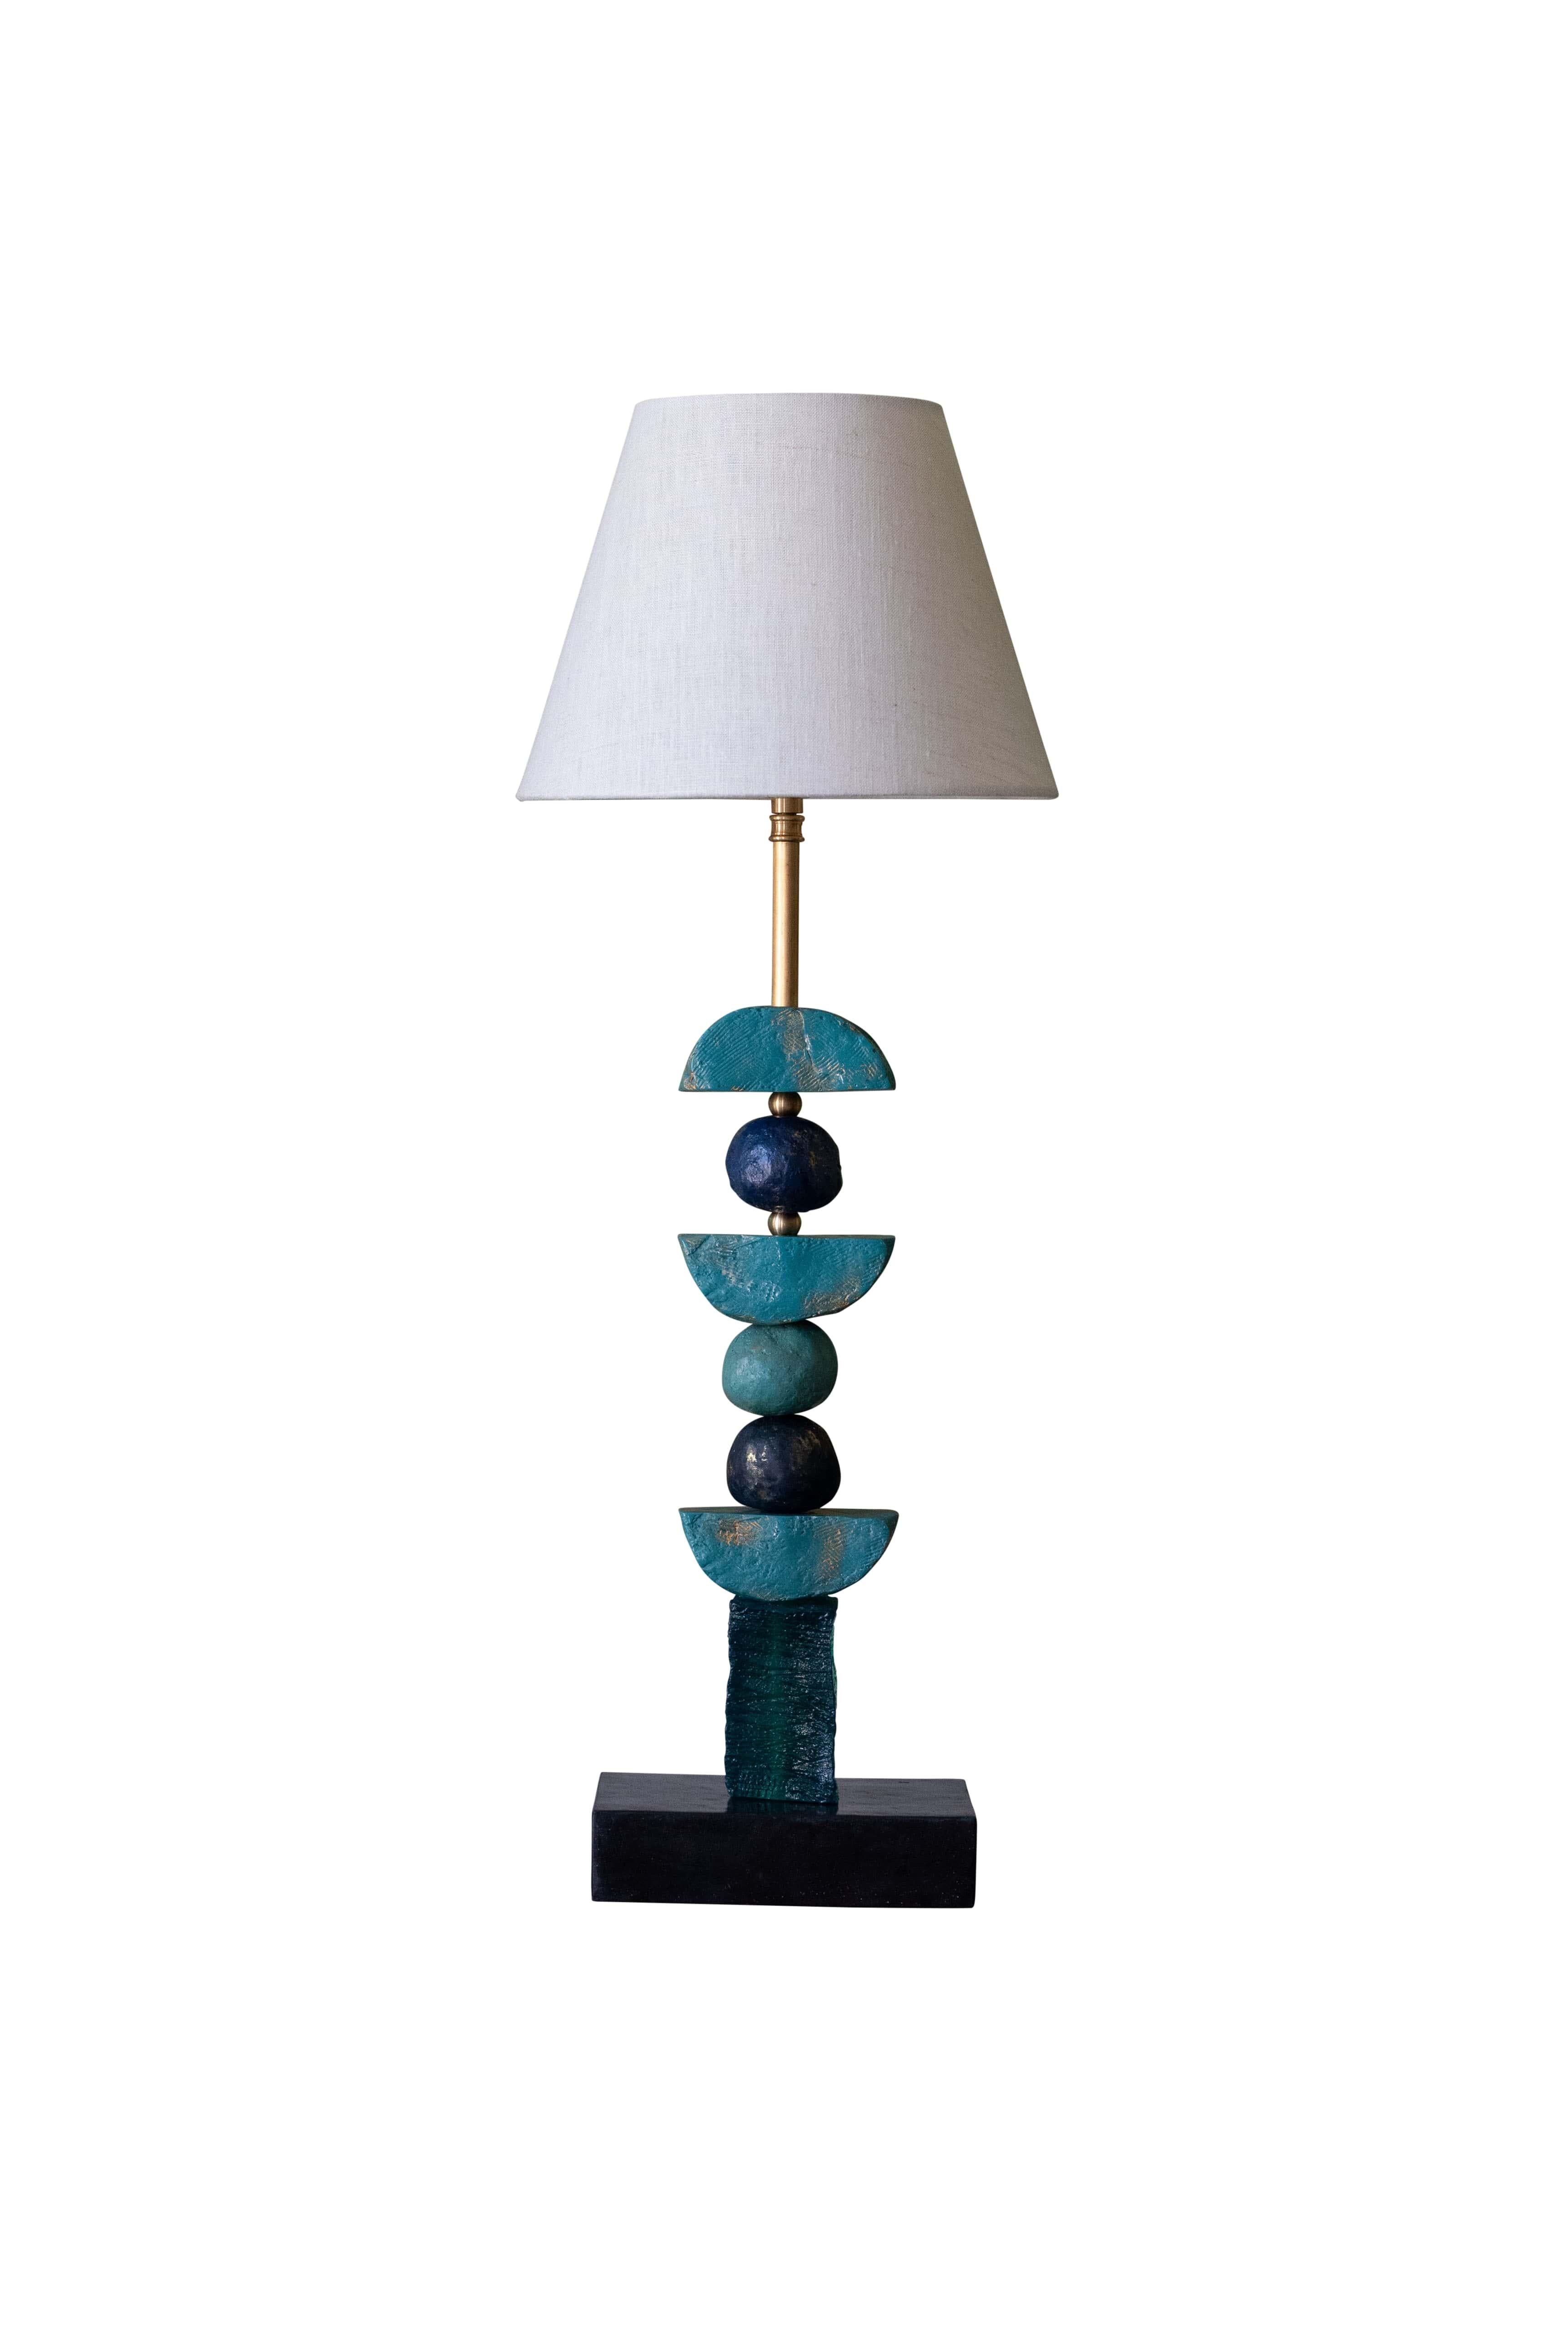 This contemporary Margit Wittig table lamp sits on a rectangular slate base and includes hand cast spheres in blue and half moons in teal. The sculpted contemporary components, with its organic texture is a signature of Margit Wittig's work. The